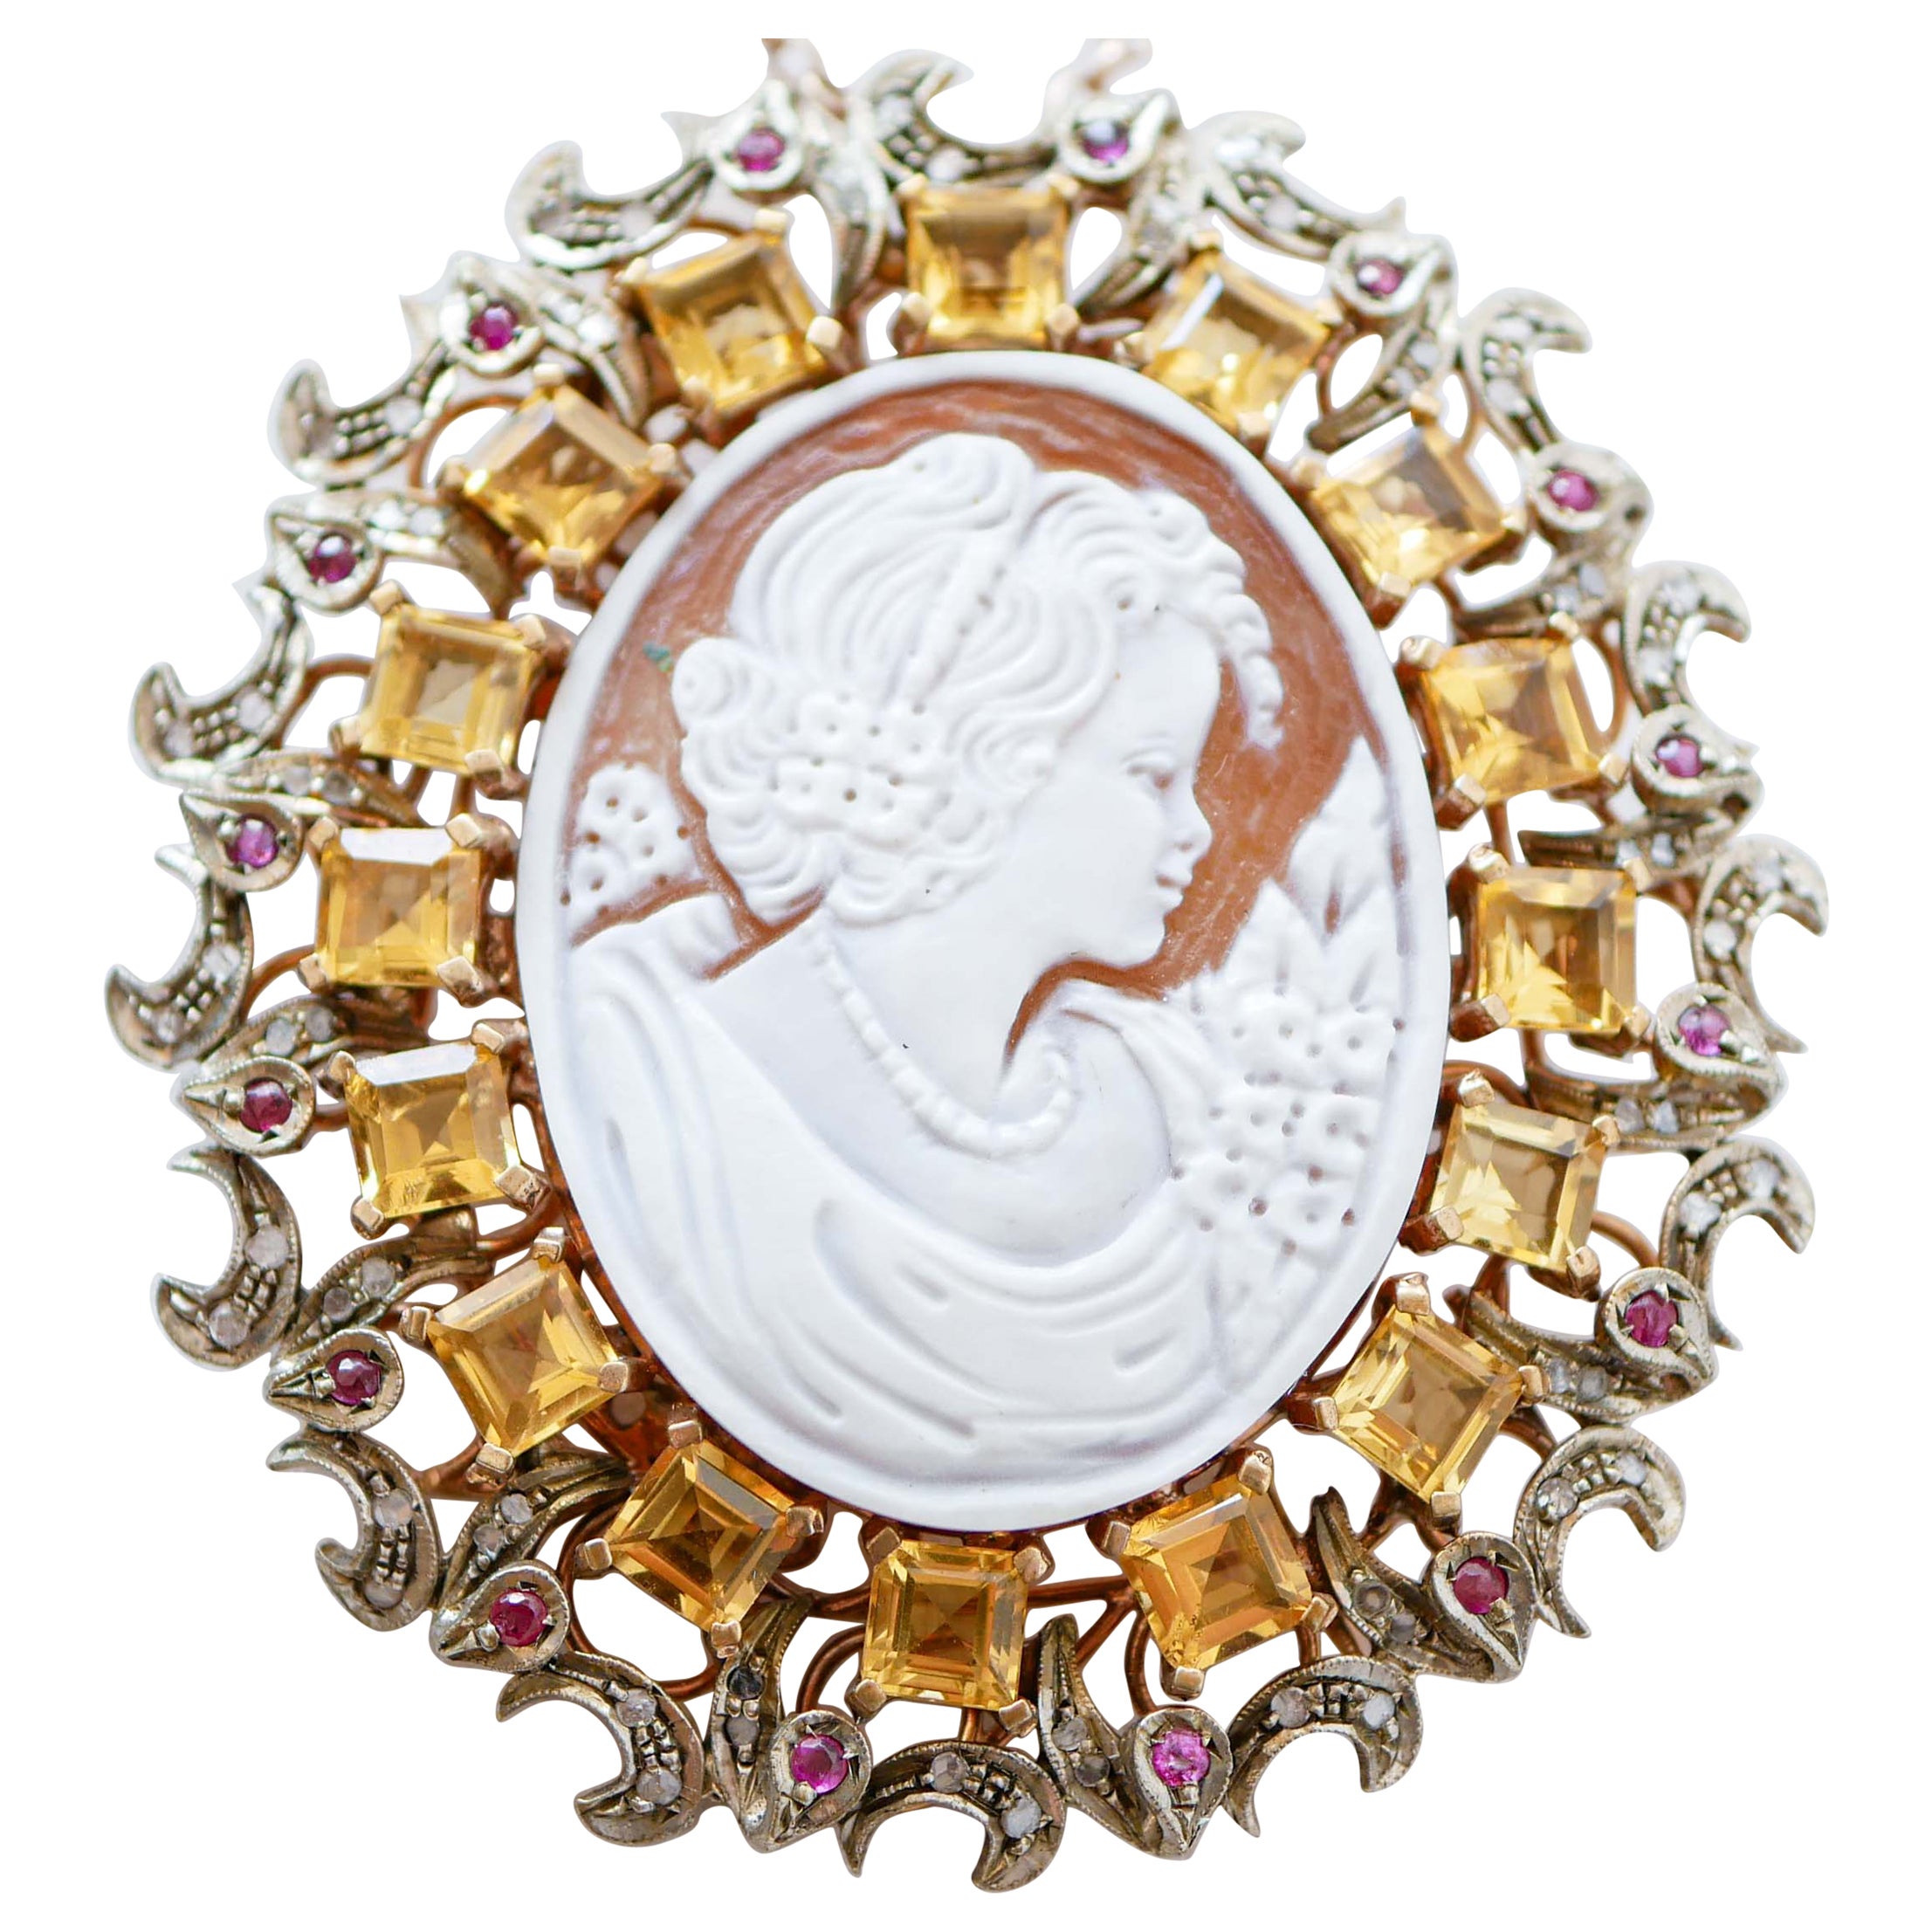 Cameo, Topazs, Rubies, Diamonds, Rose Gold and Silver Brooch/Pendant. For Sale